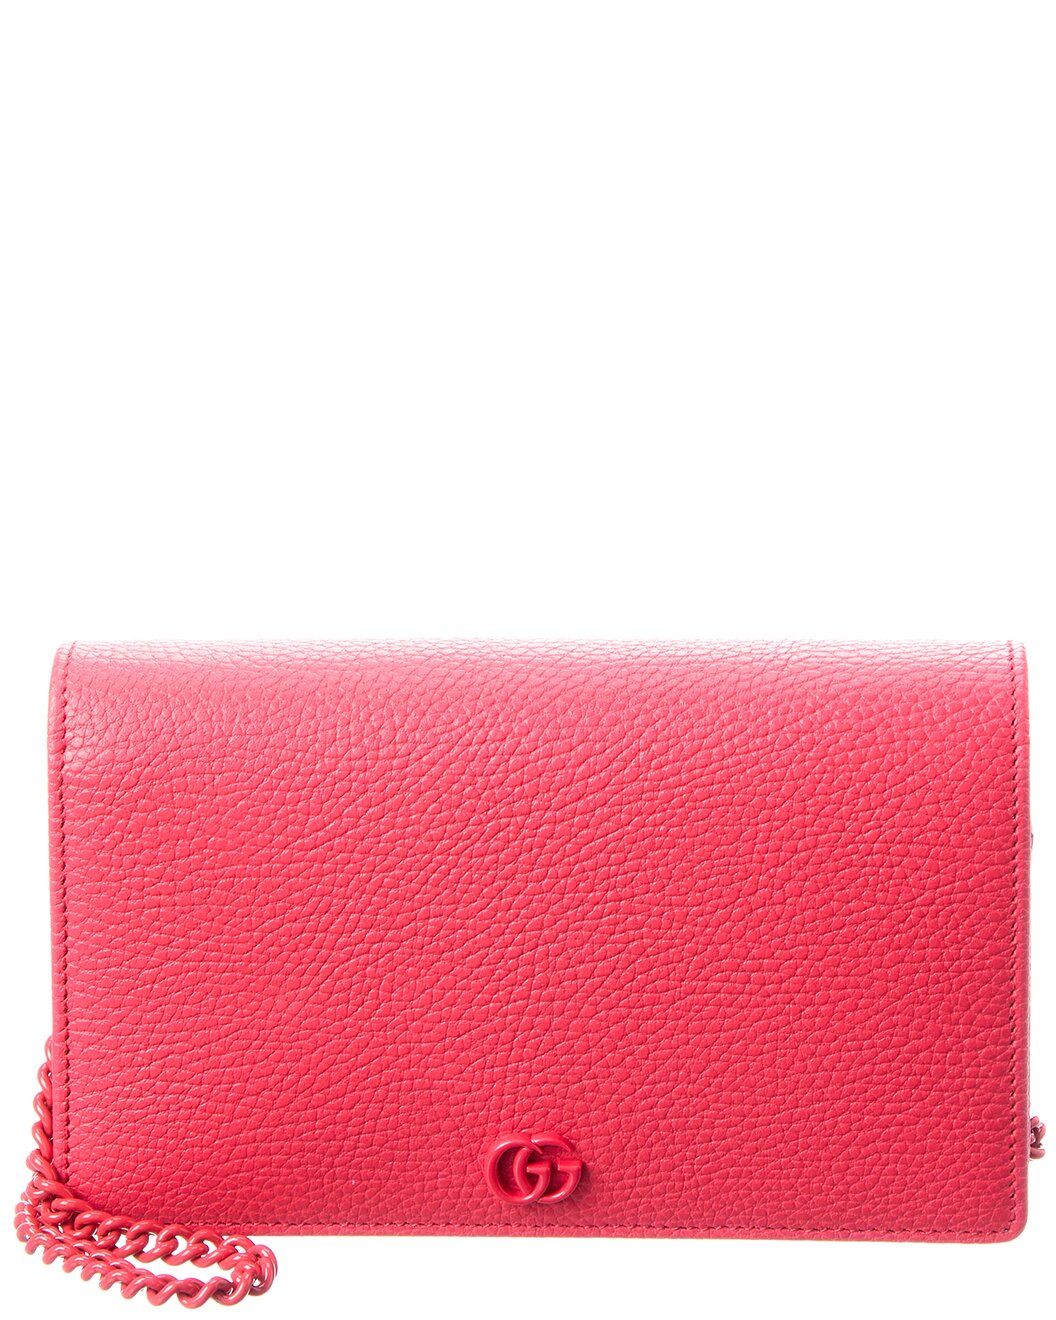 GG Marmont Leather Chain Wallet | Ruelala